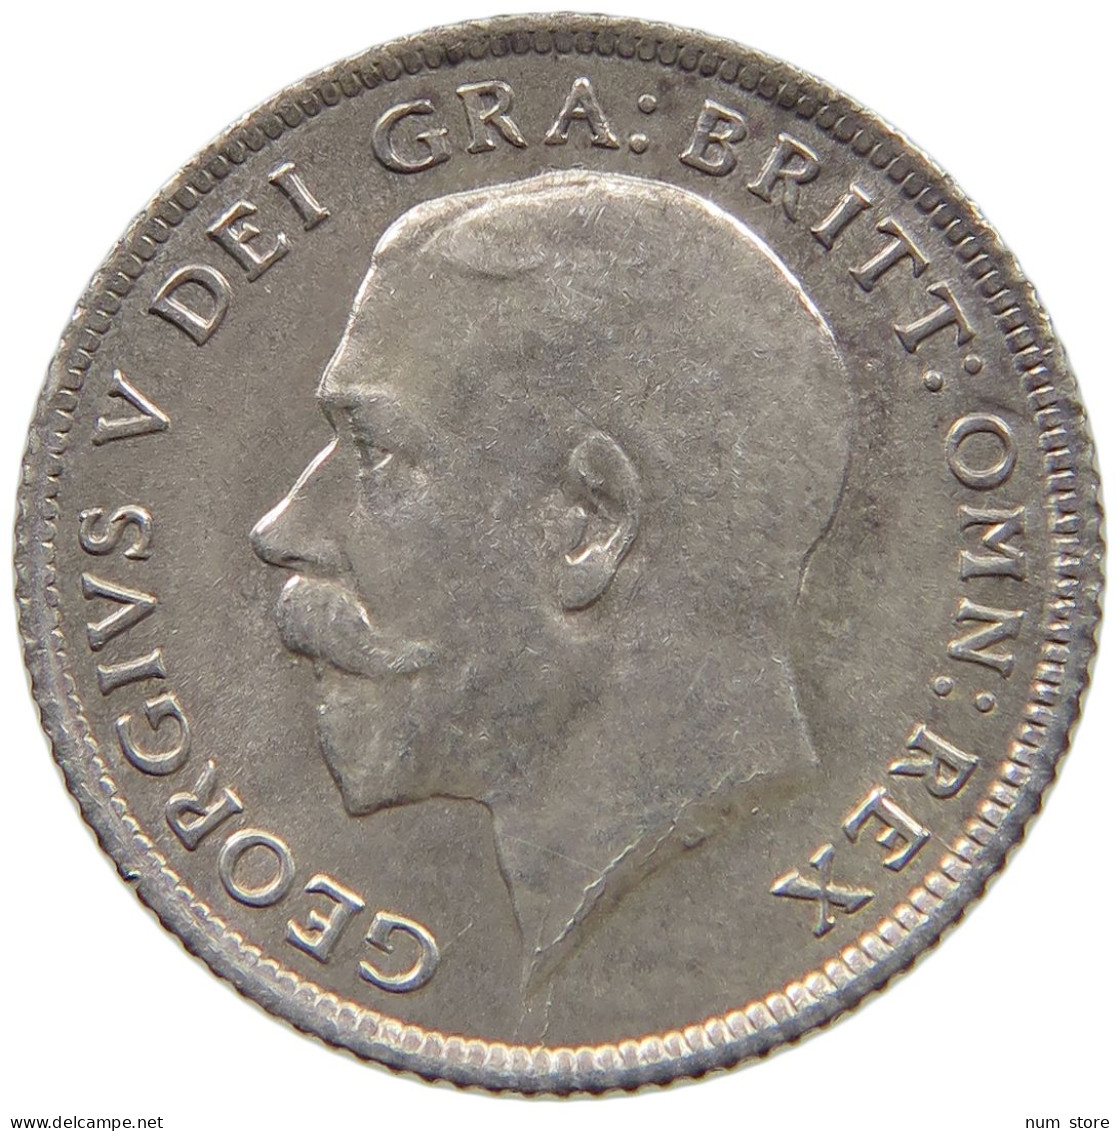 GREAT BRITAIN SIXPENCE 1914 George V. (1910-1936) #t005 0247 - H. 6 Pence